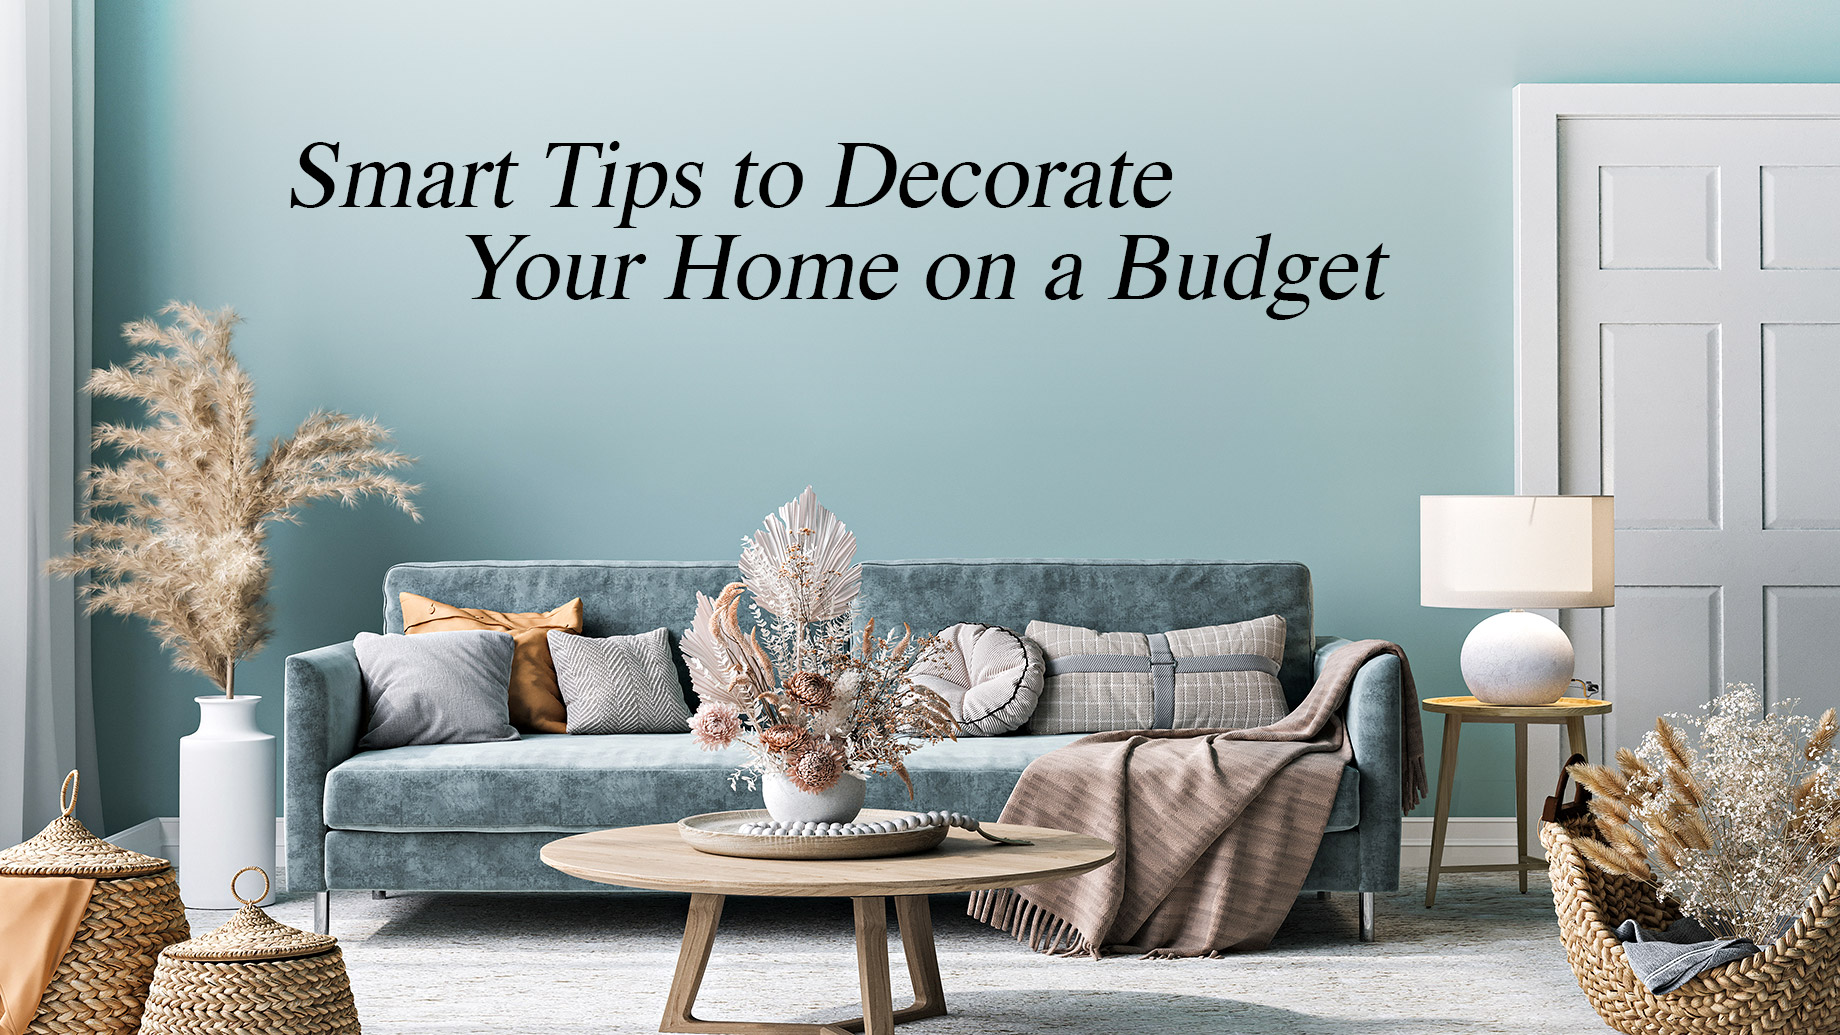 How To Decorate Your Home On A Budget: A DIY Guide